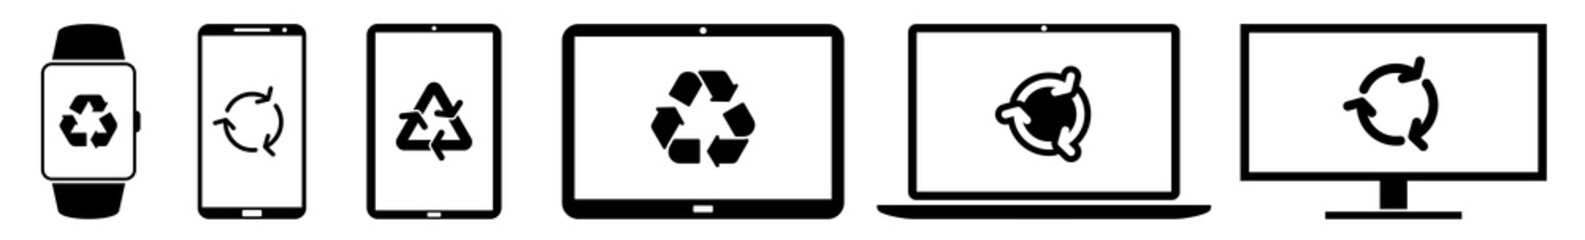 Display recycle, recycling, reusing, recycled, recyclable Icon Devices Set | Web Screen Device Online | Laptop Vector Illustration | Mobile Phone | PC Computer Smartphone Tablet Sign Isolated